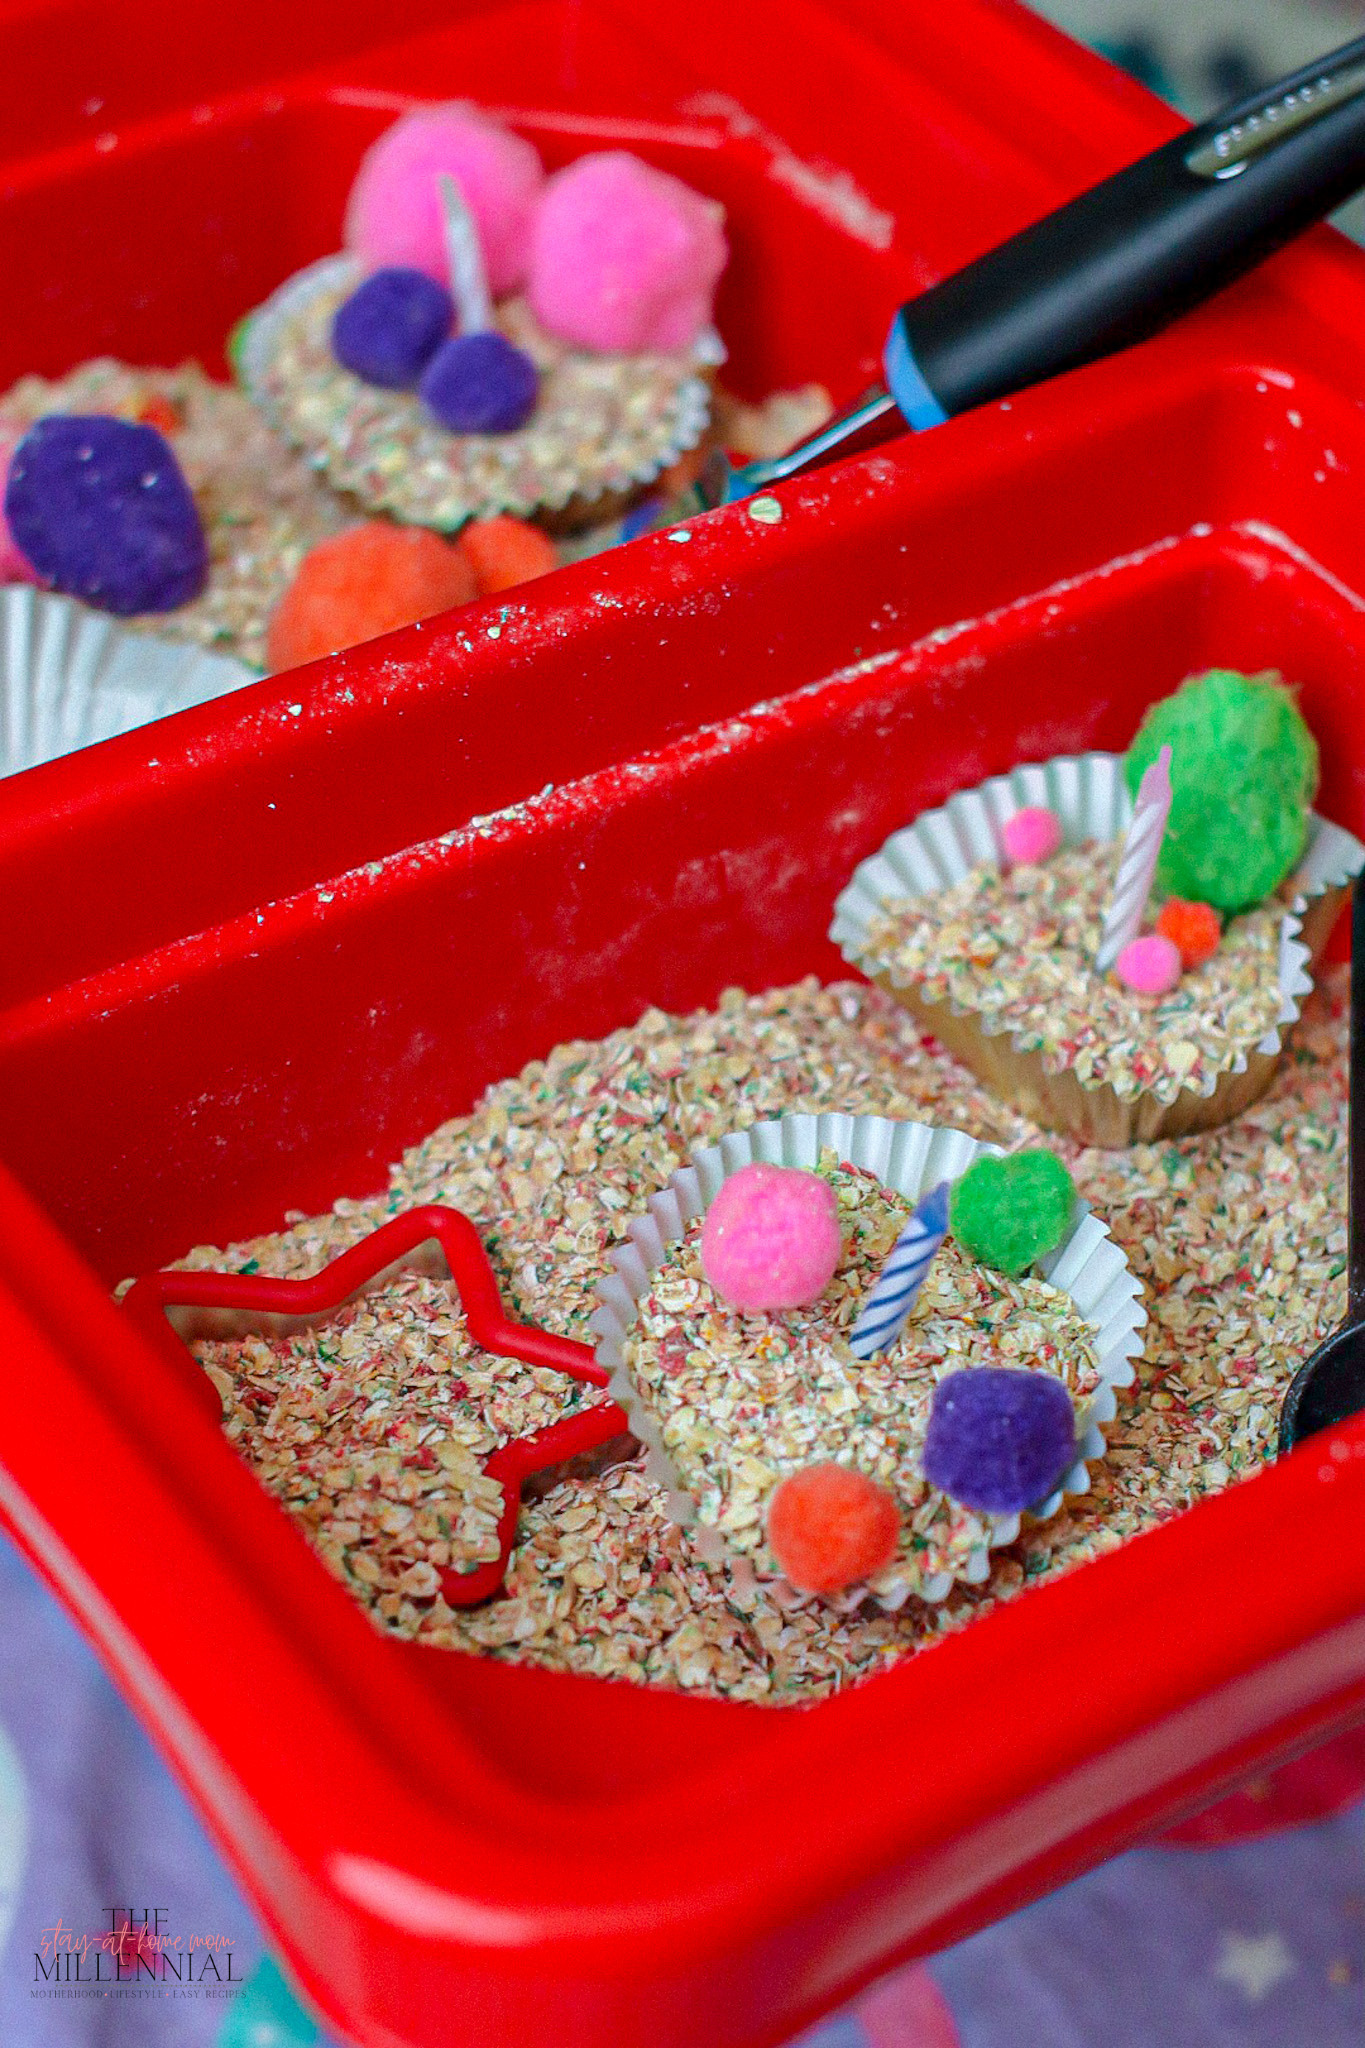 Sensory play has become a daily part of our morning routine and this cupcake bakery-themed sensory table is perfect for your little learner!